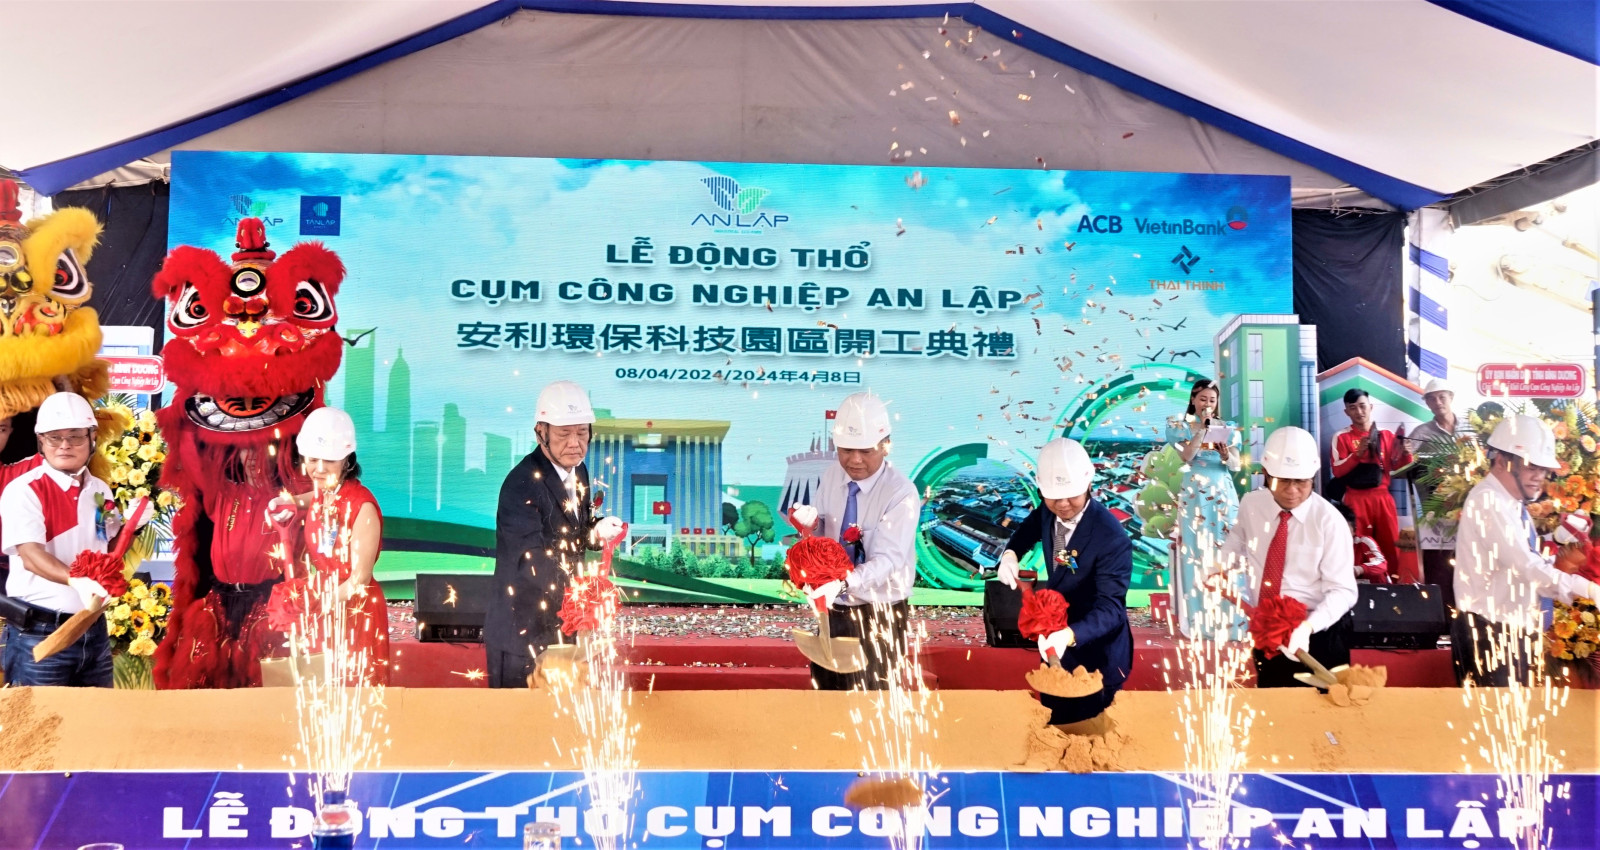 Binh Duong started construction on the 8th industrial cluster in Dau Tieng district